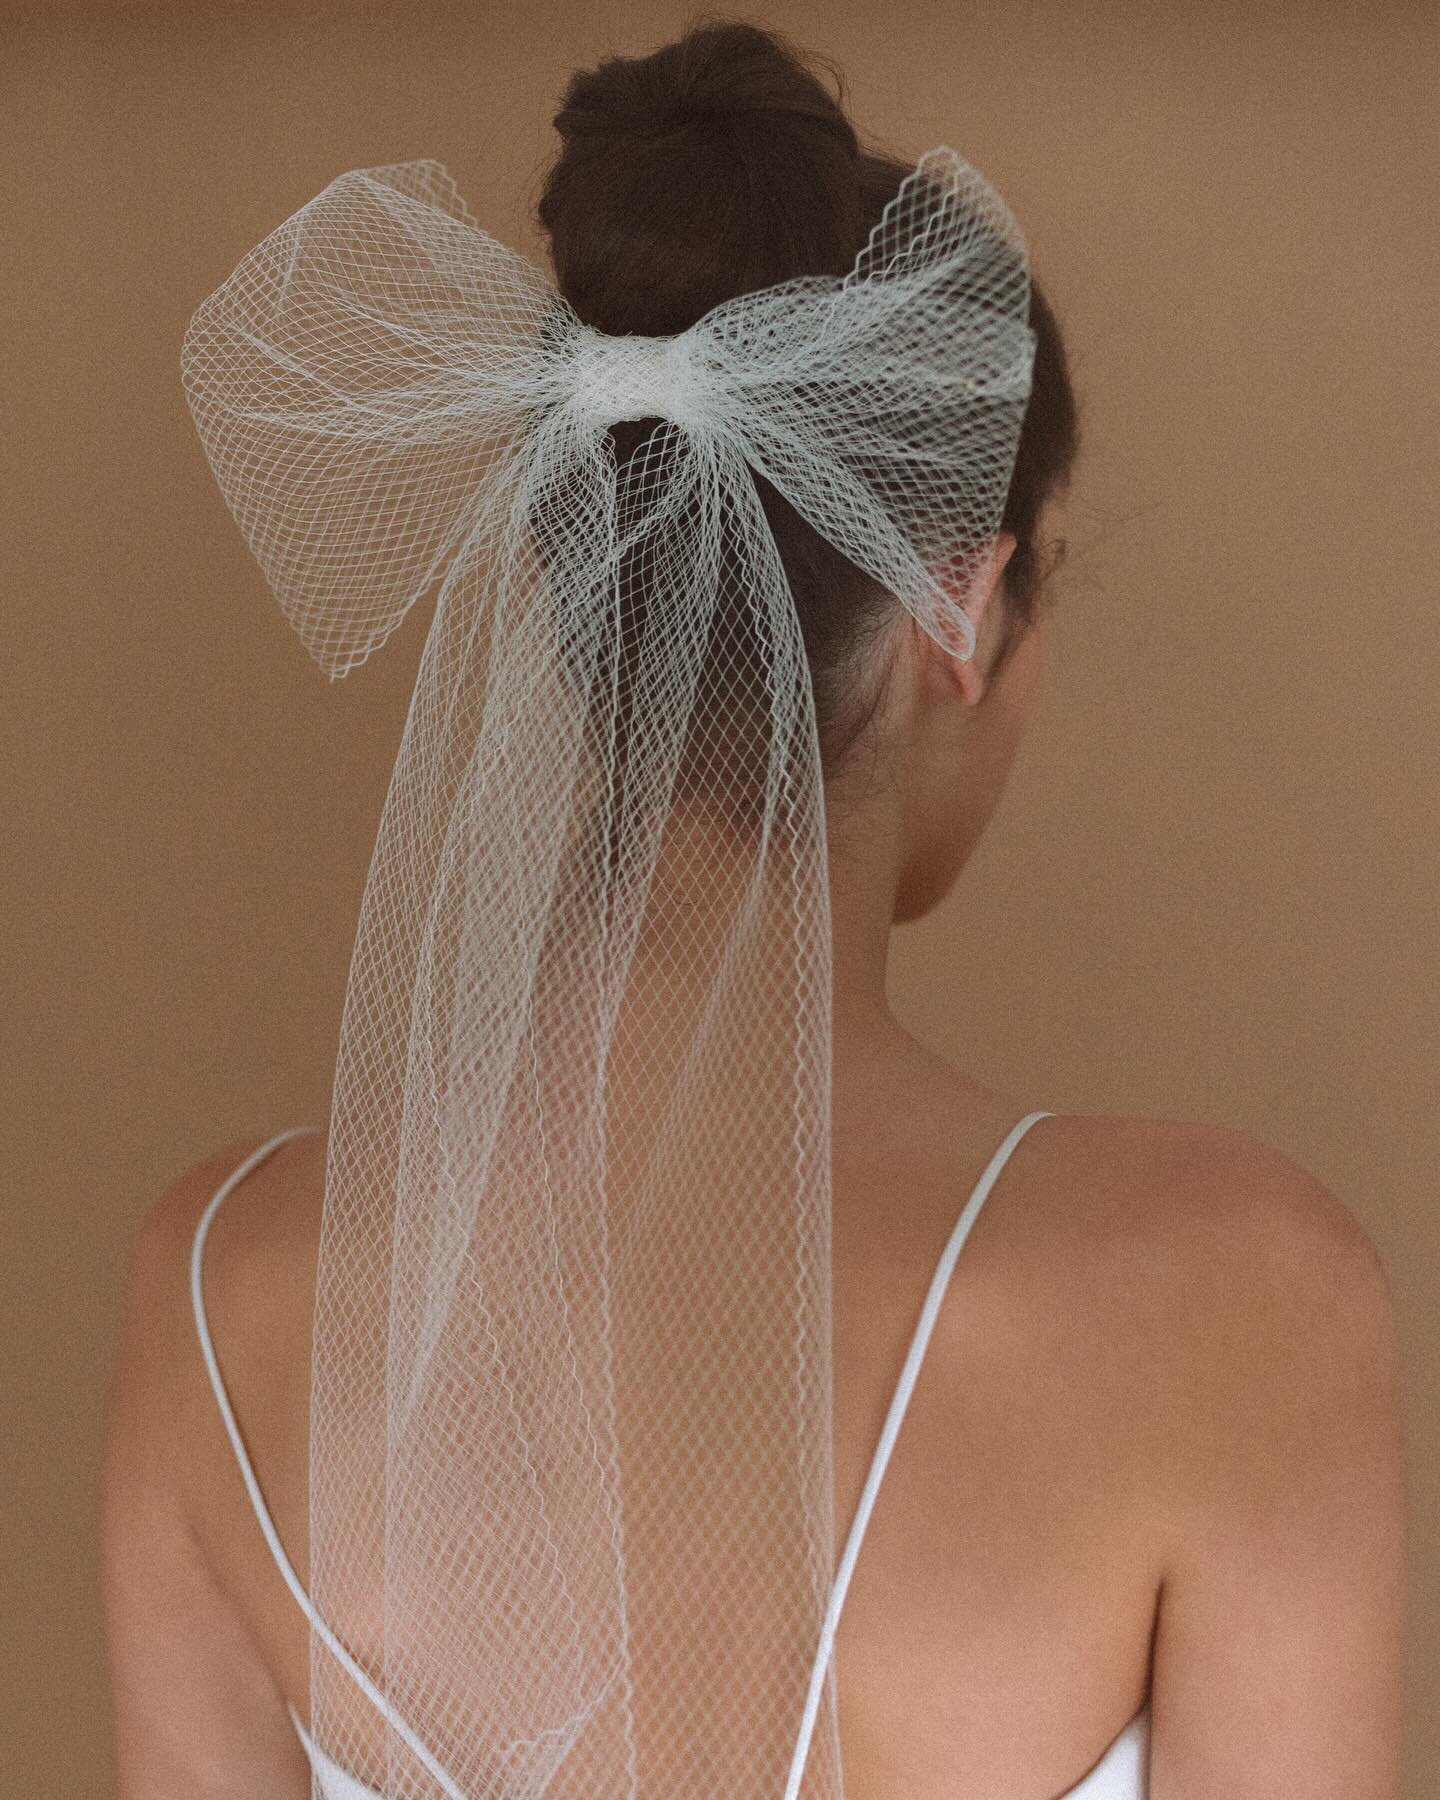 Bows + florals, two great options to team with your wedding hair, especially when they are this nice!

Photographer @emmapilkingtonphotography 
Hair + makeup @sarahmortenmakeupartist 
Dresses @hermiabridal @project.bridal @bonbride @alarobe 
Accessor